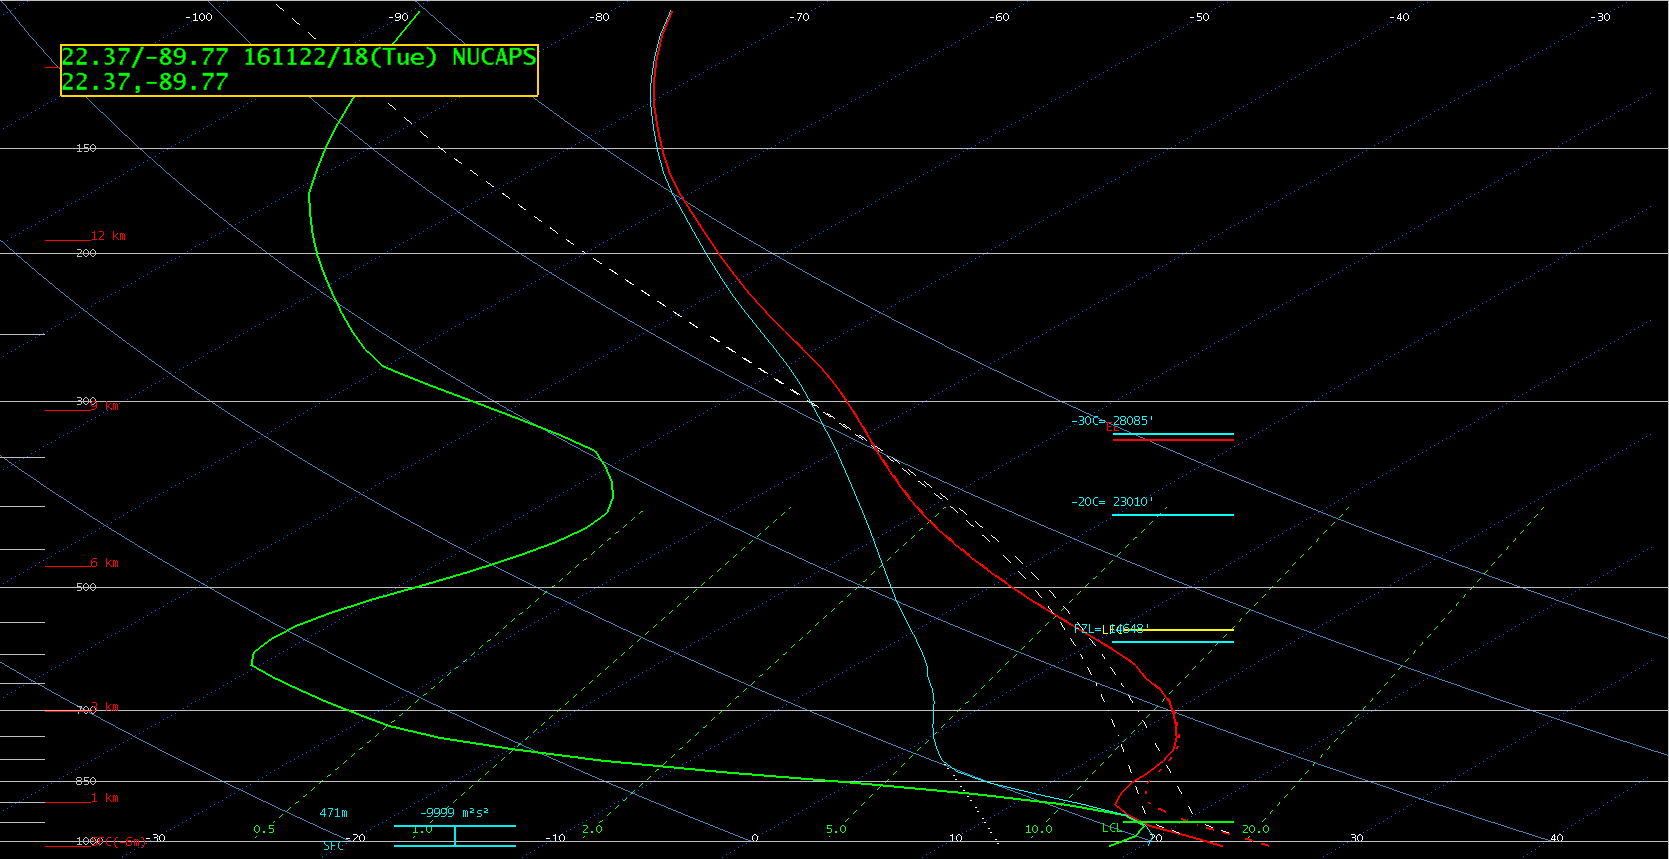 NUCAPS sounding profile for a point over the Gulf of Mexico, north of the Yucatan Peninsula [click to enlarge]